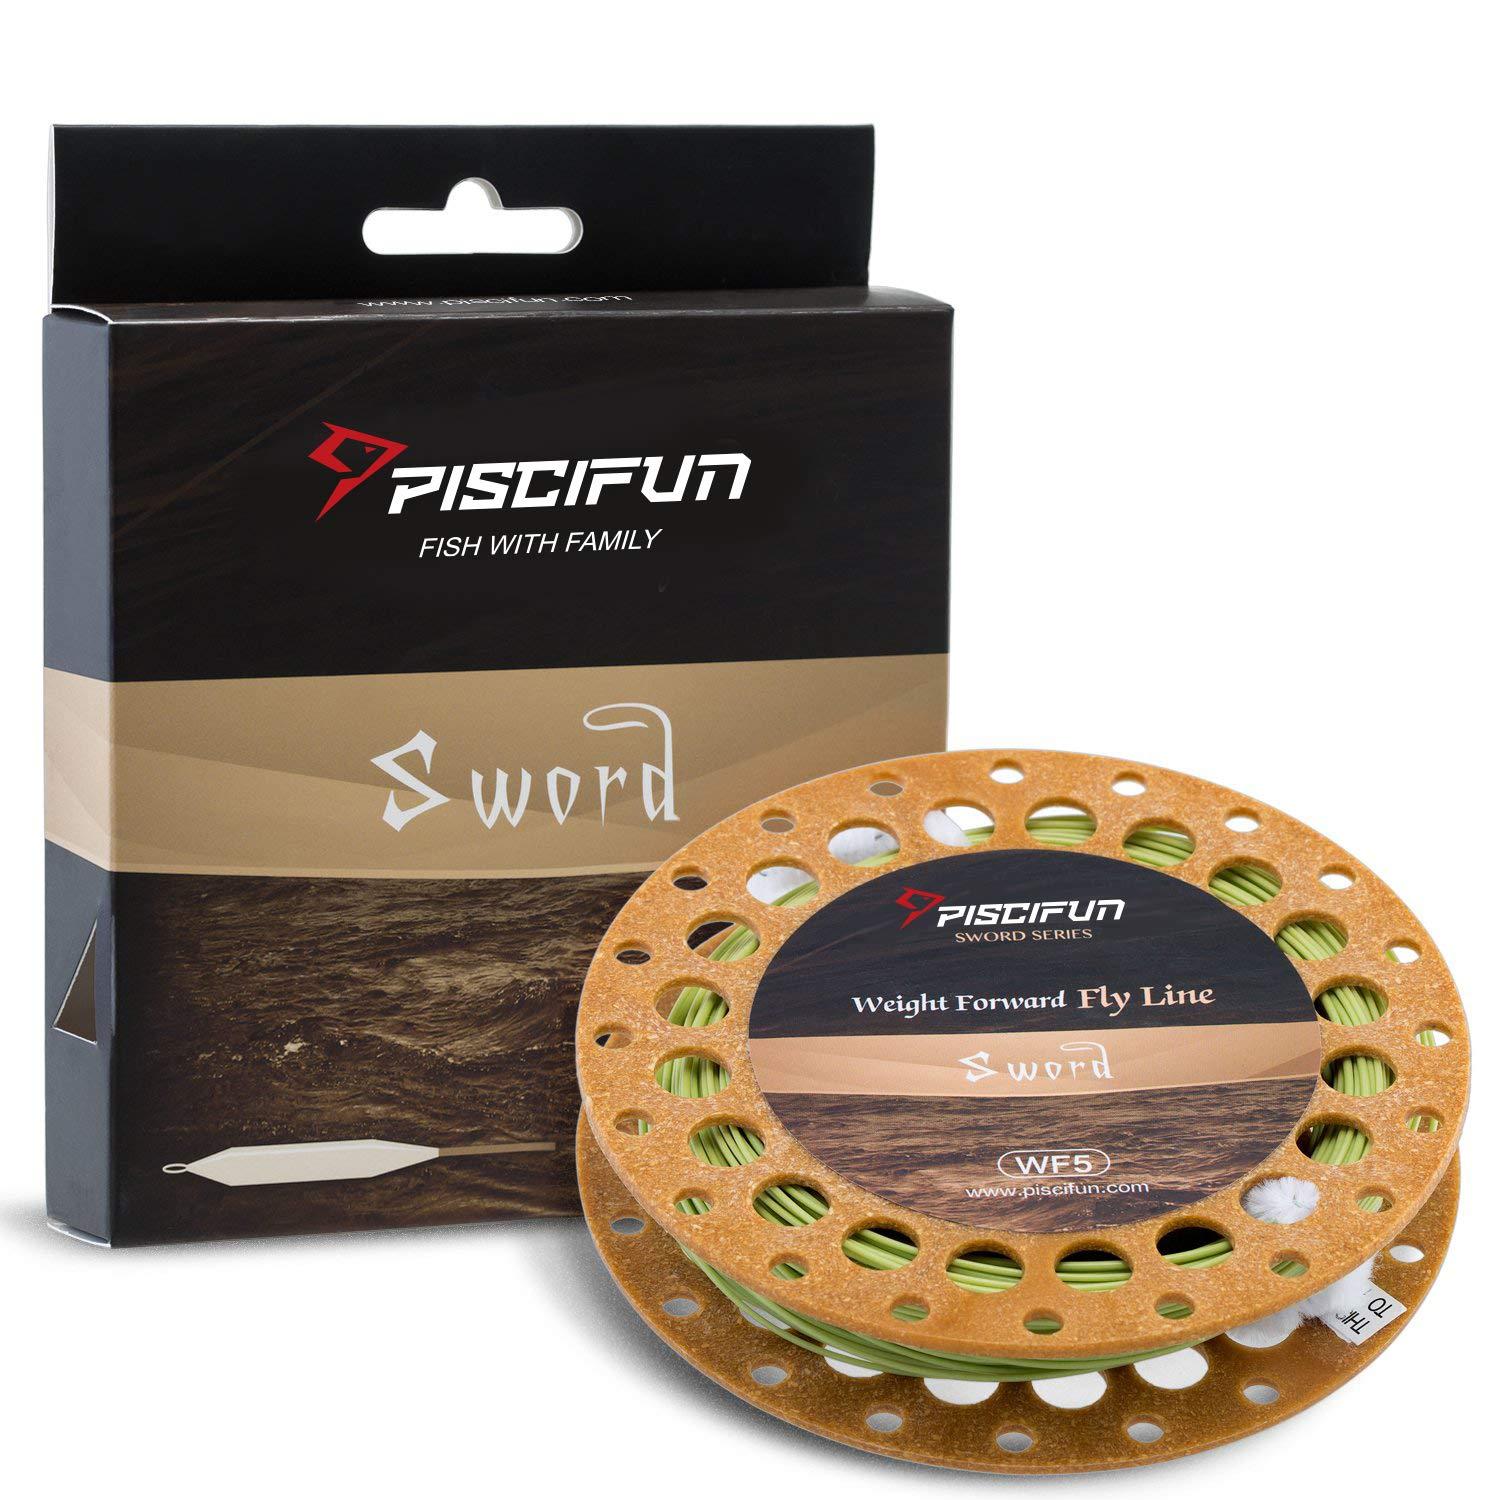 Piscifun Sword Fly Fishing Line with Welded Loop, Weight Forward